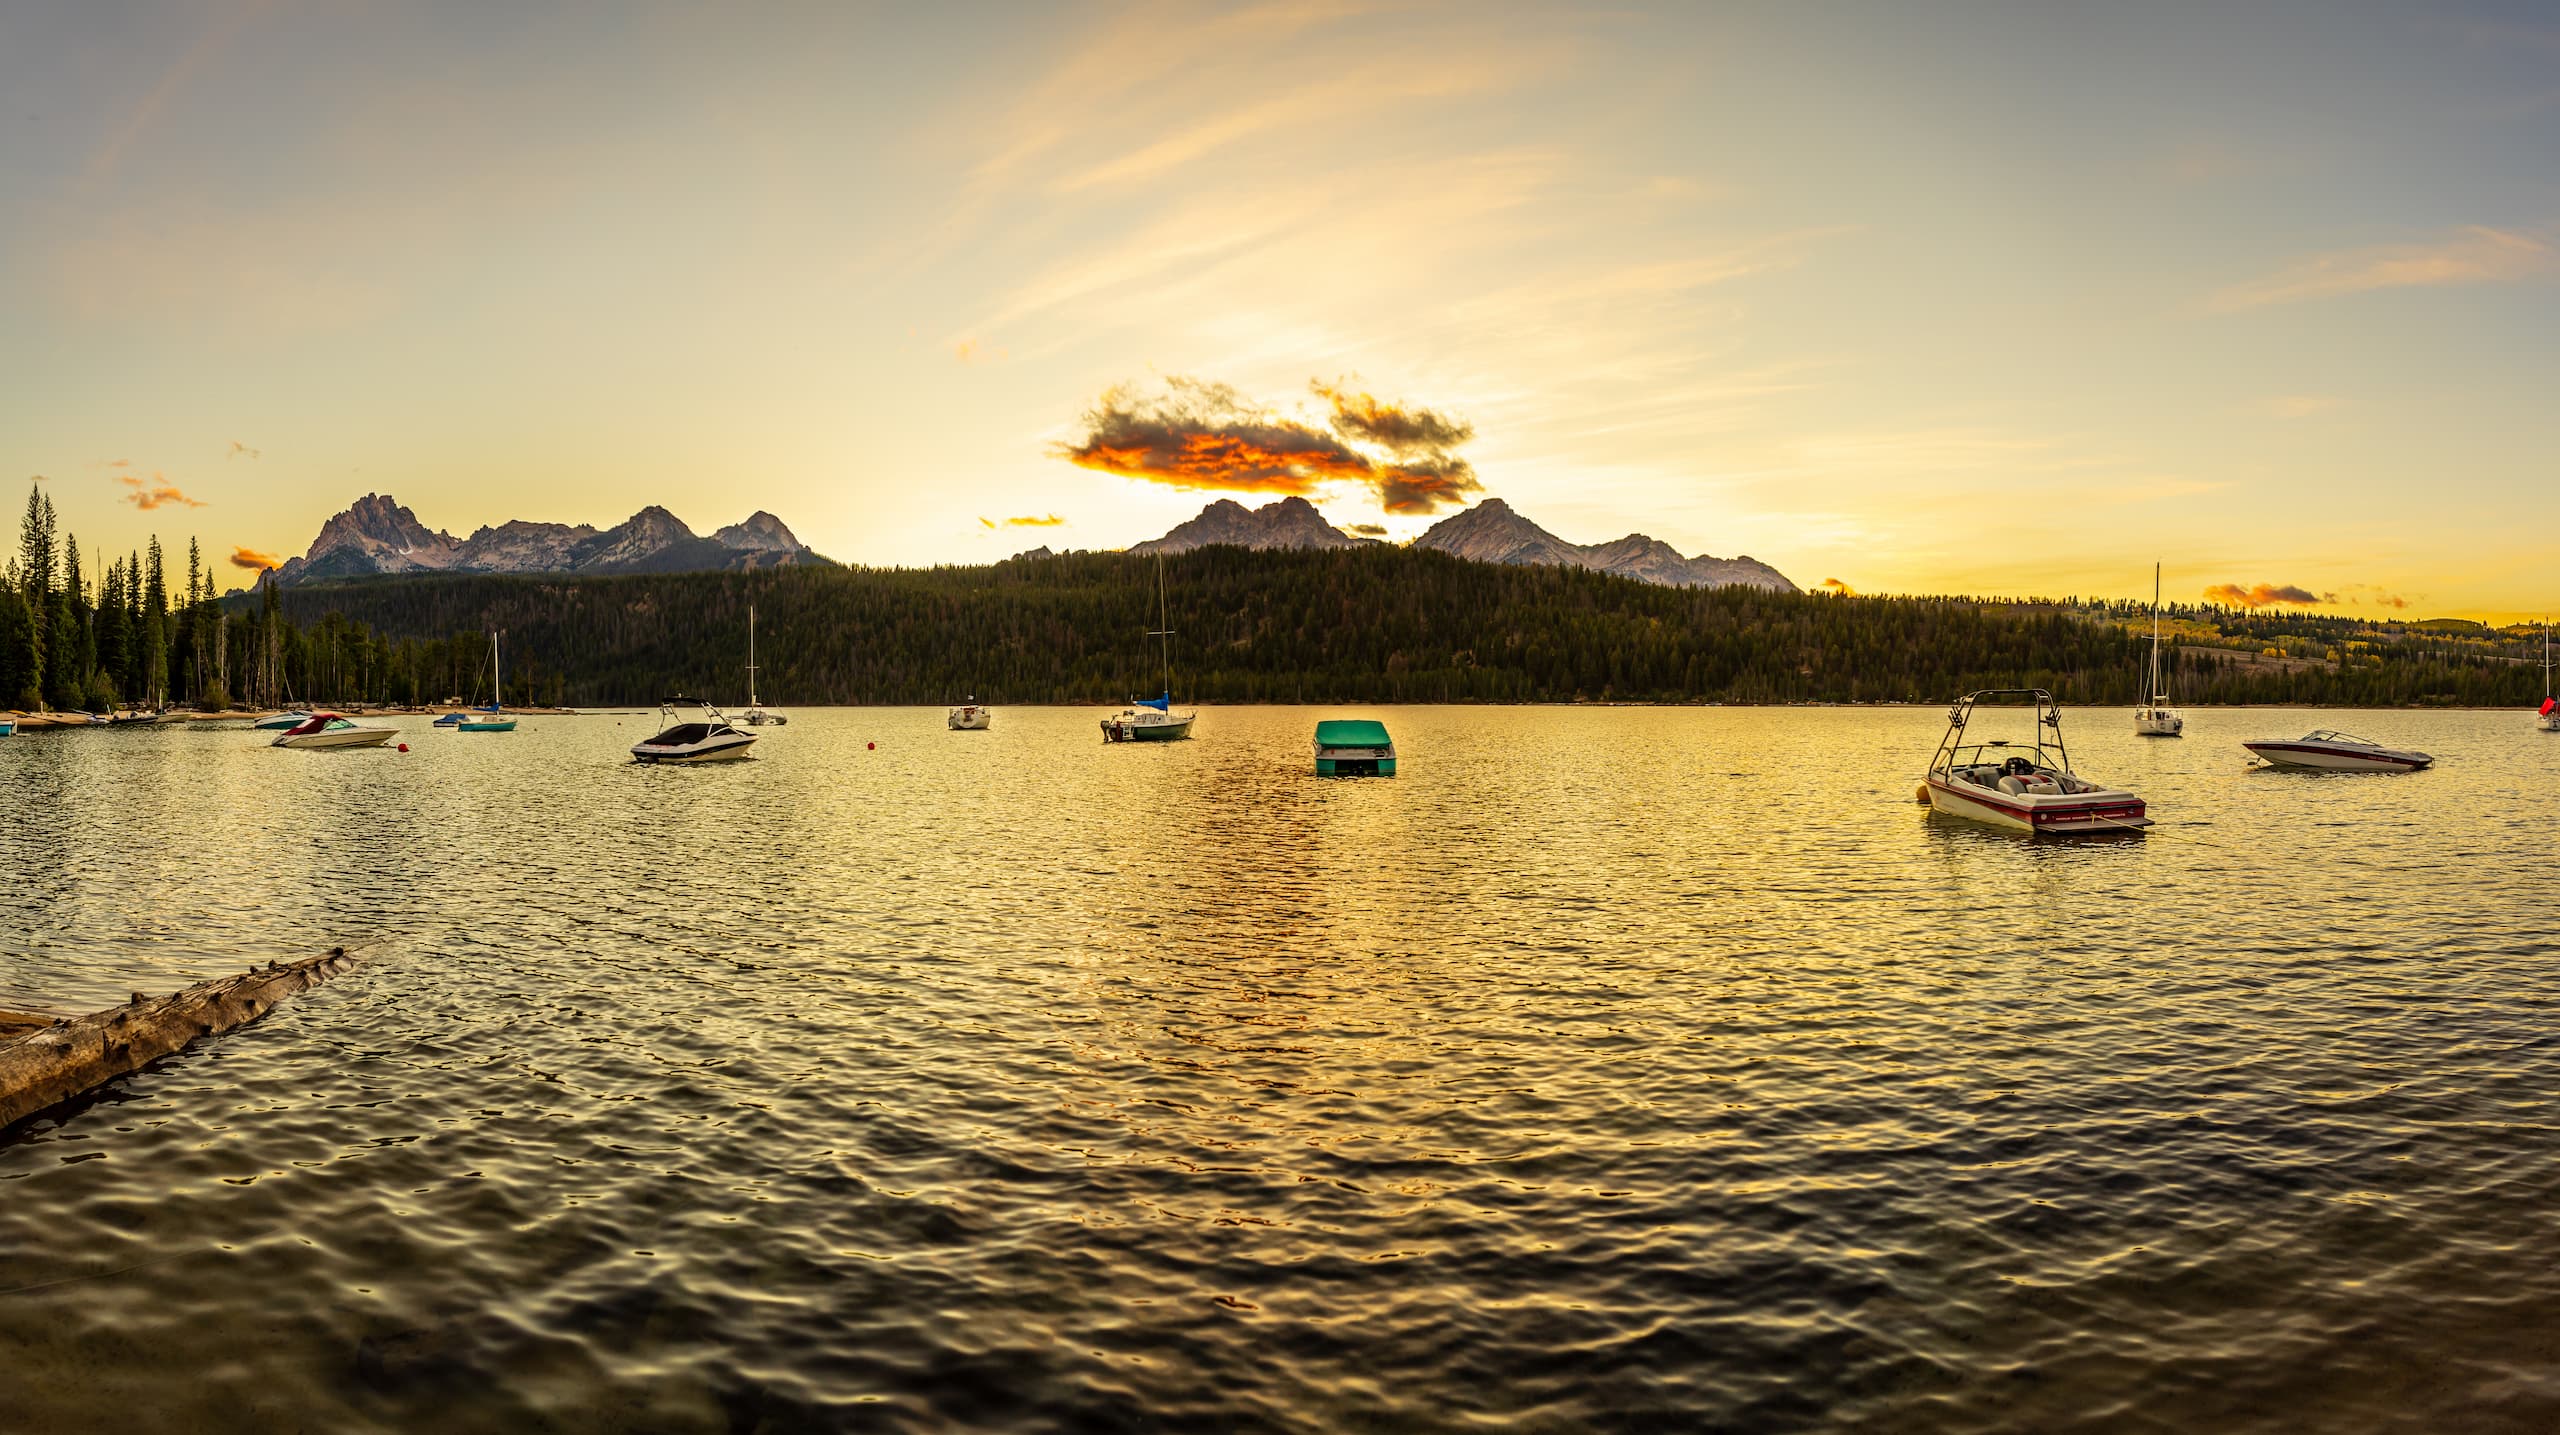 Mountain sunset on Red Fish Lake in Stanley, ID 